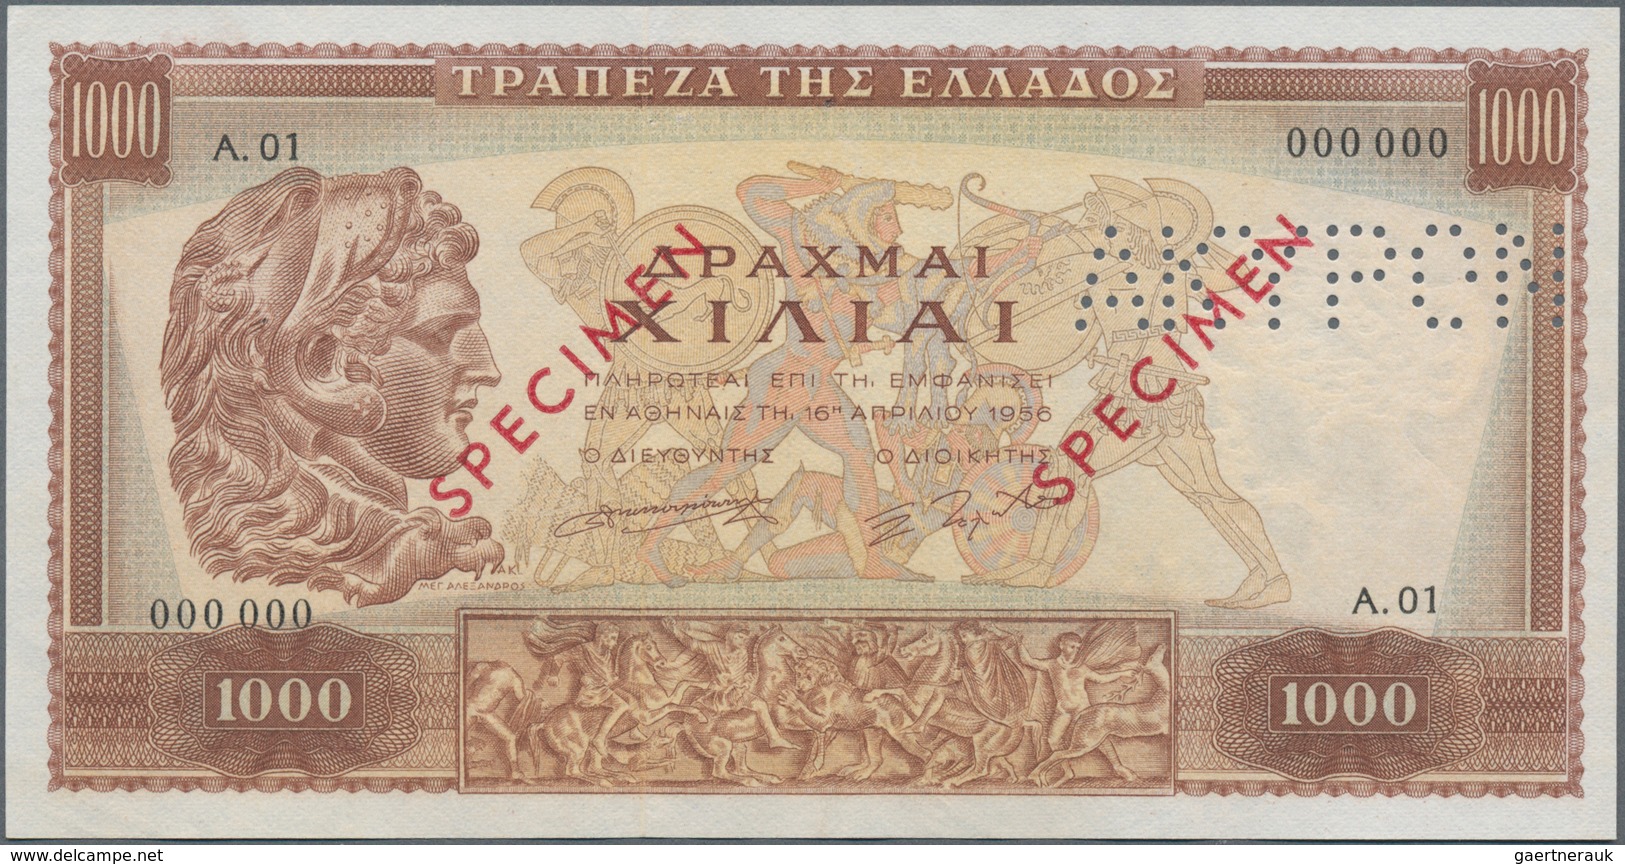 Greece / Griechenland: 1000 Drachmai 1956 SPECIMEN, P.194s, Serial Number A.01 000000 With Red Overp - Griechenland